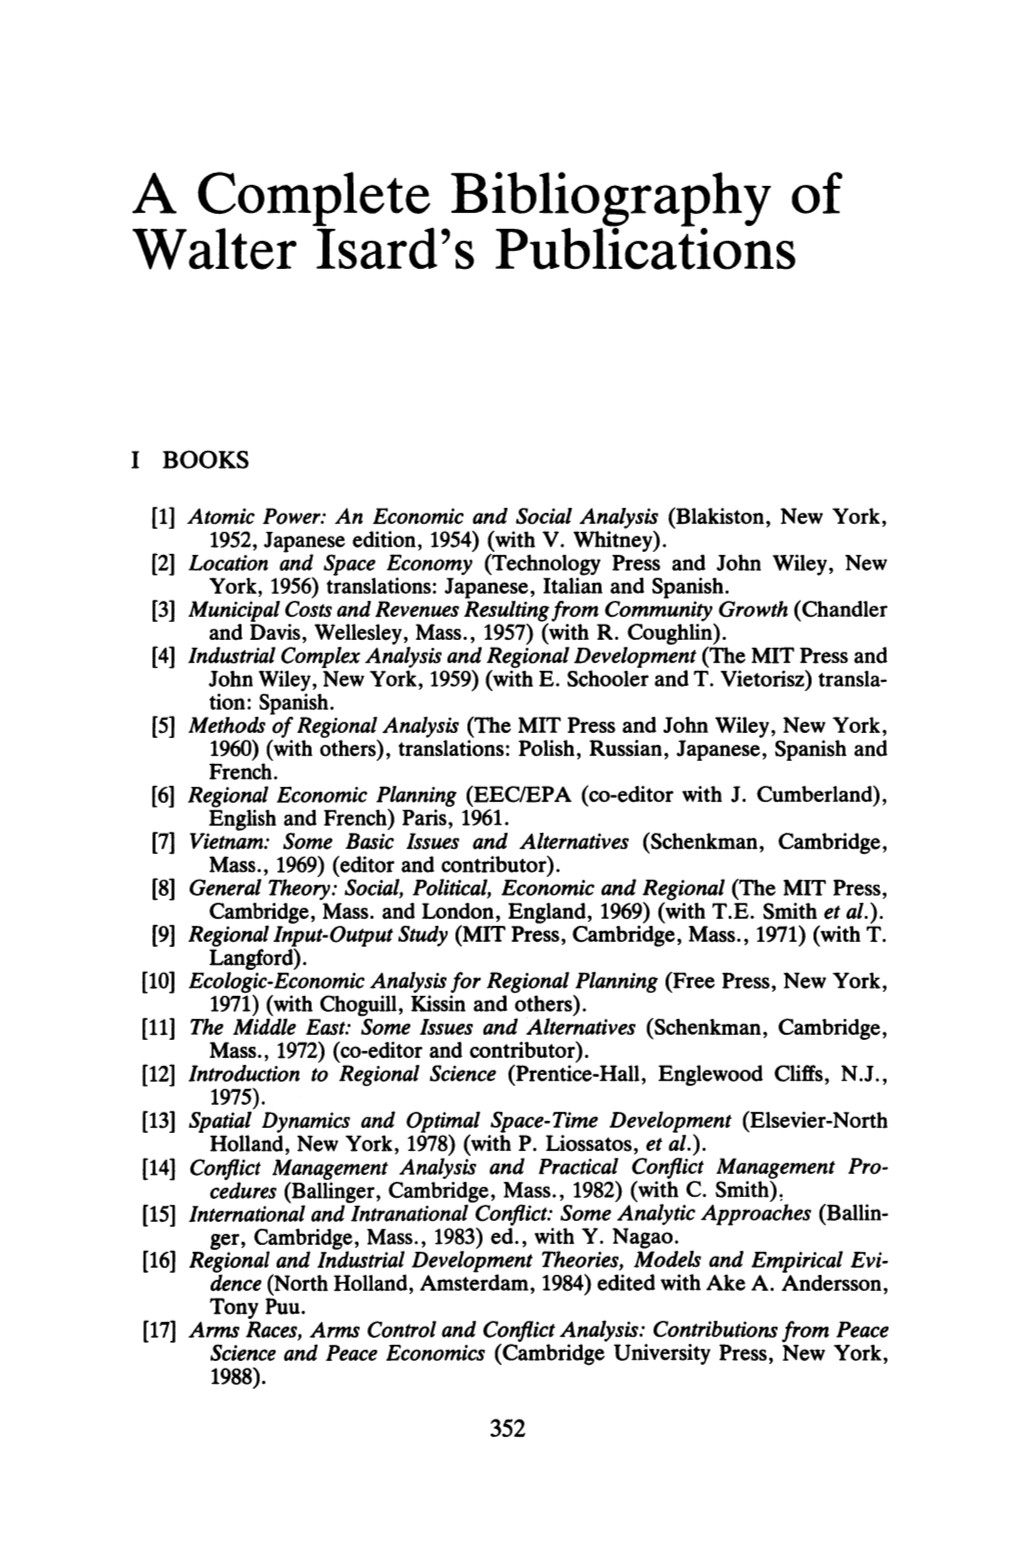 A Complete Bibliography of Walter Isard's Publications